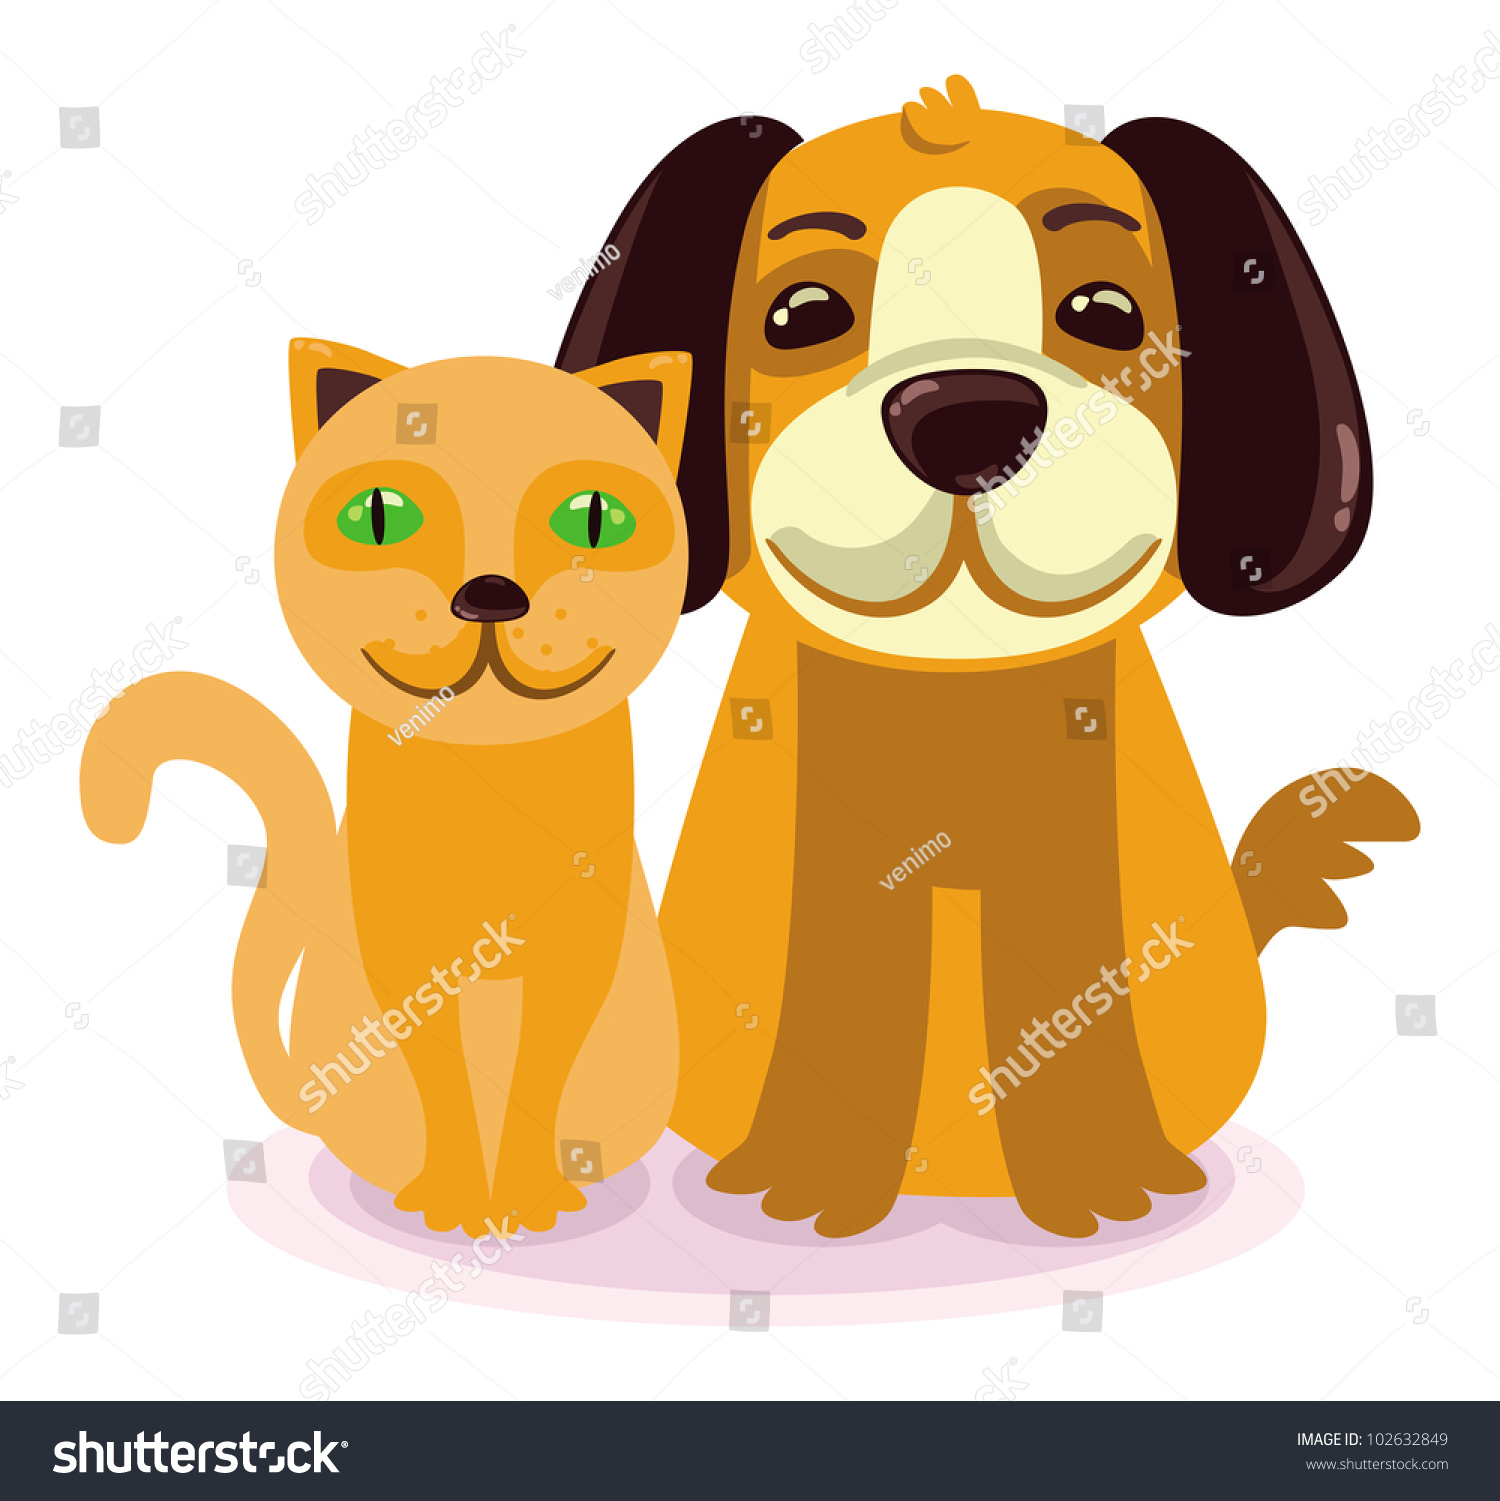 Vector Cartoon Illustration - Smiling Dog And Cat - 102632849 ...